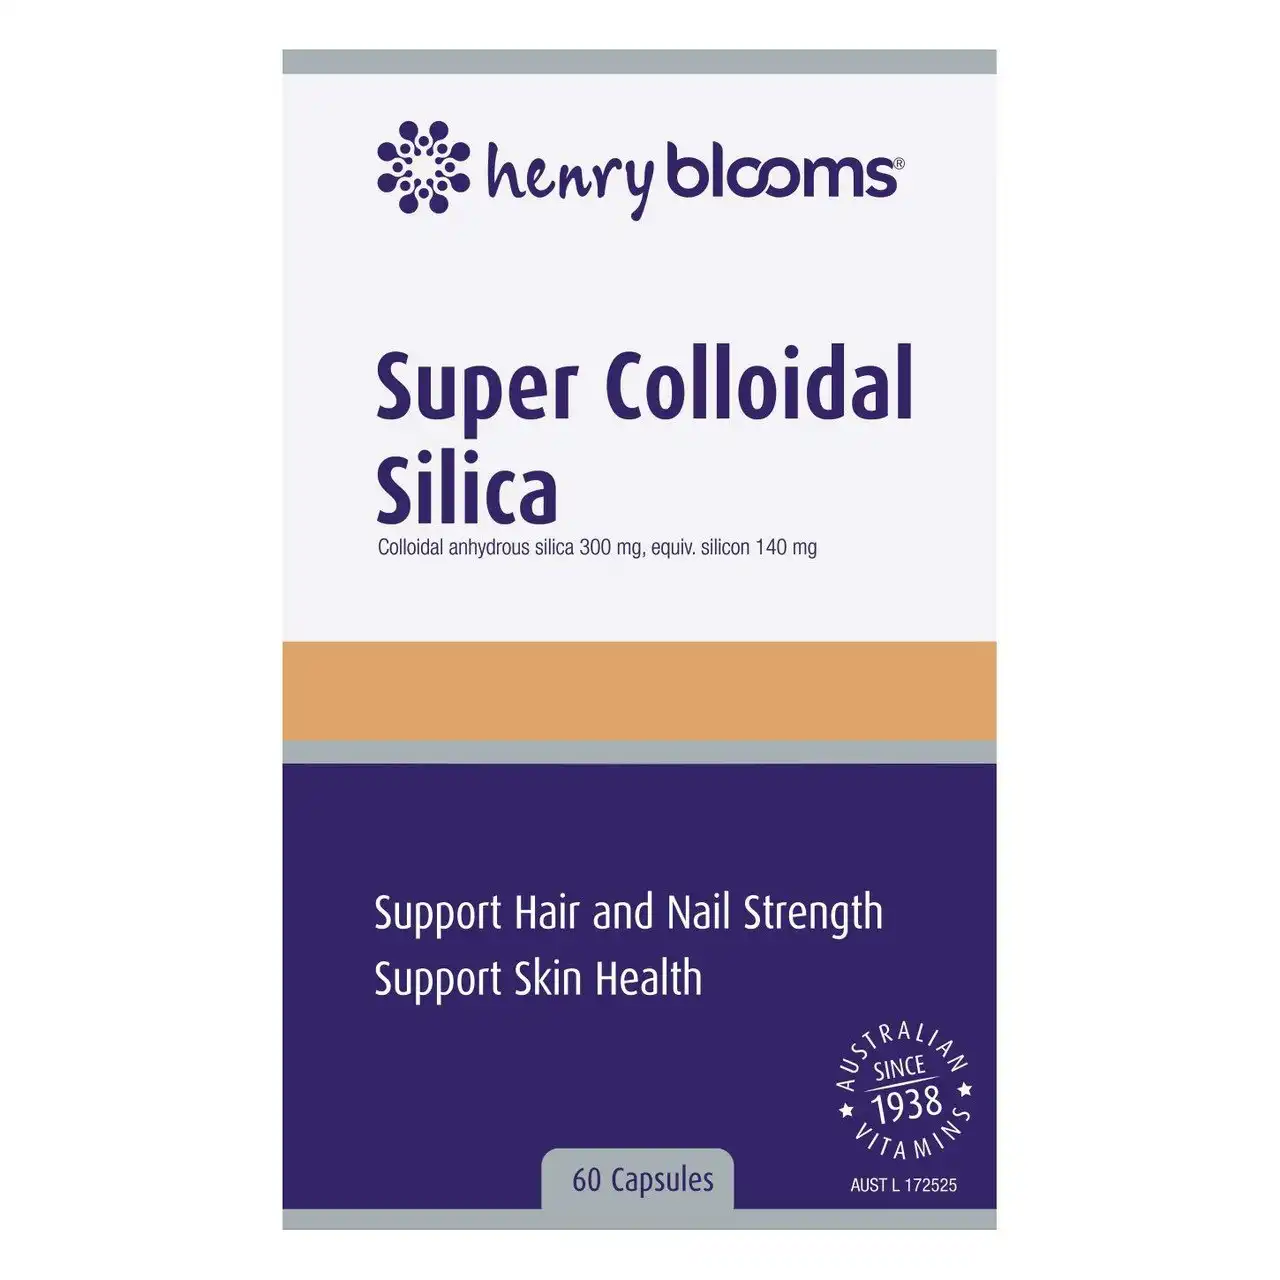 Henry Blooms Super Colloidal Silica Capsules 60